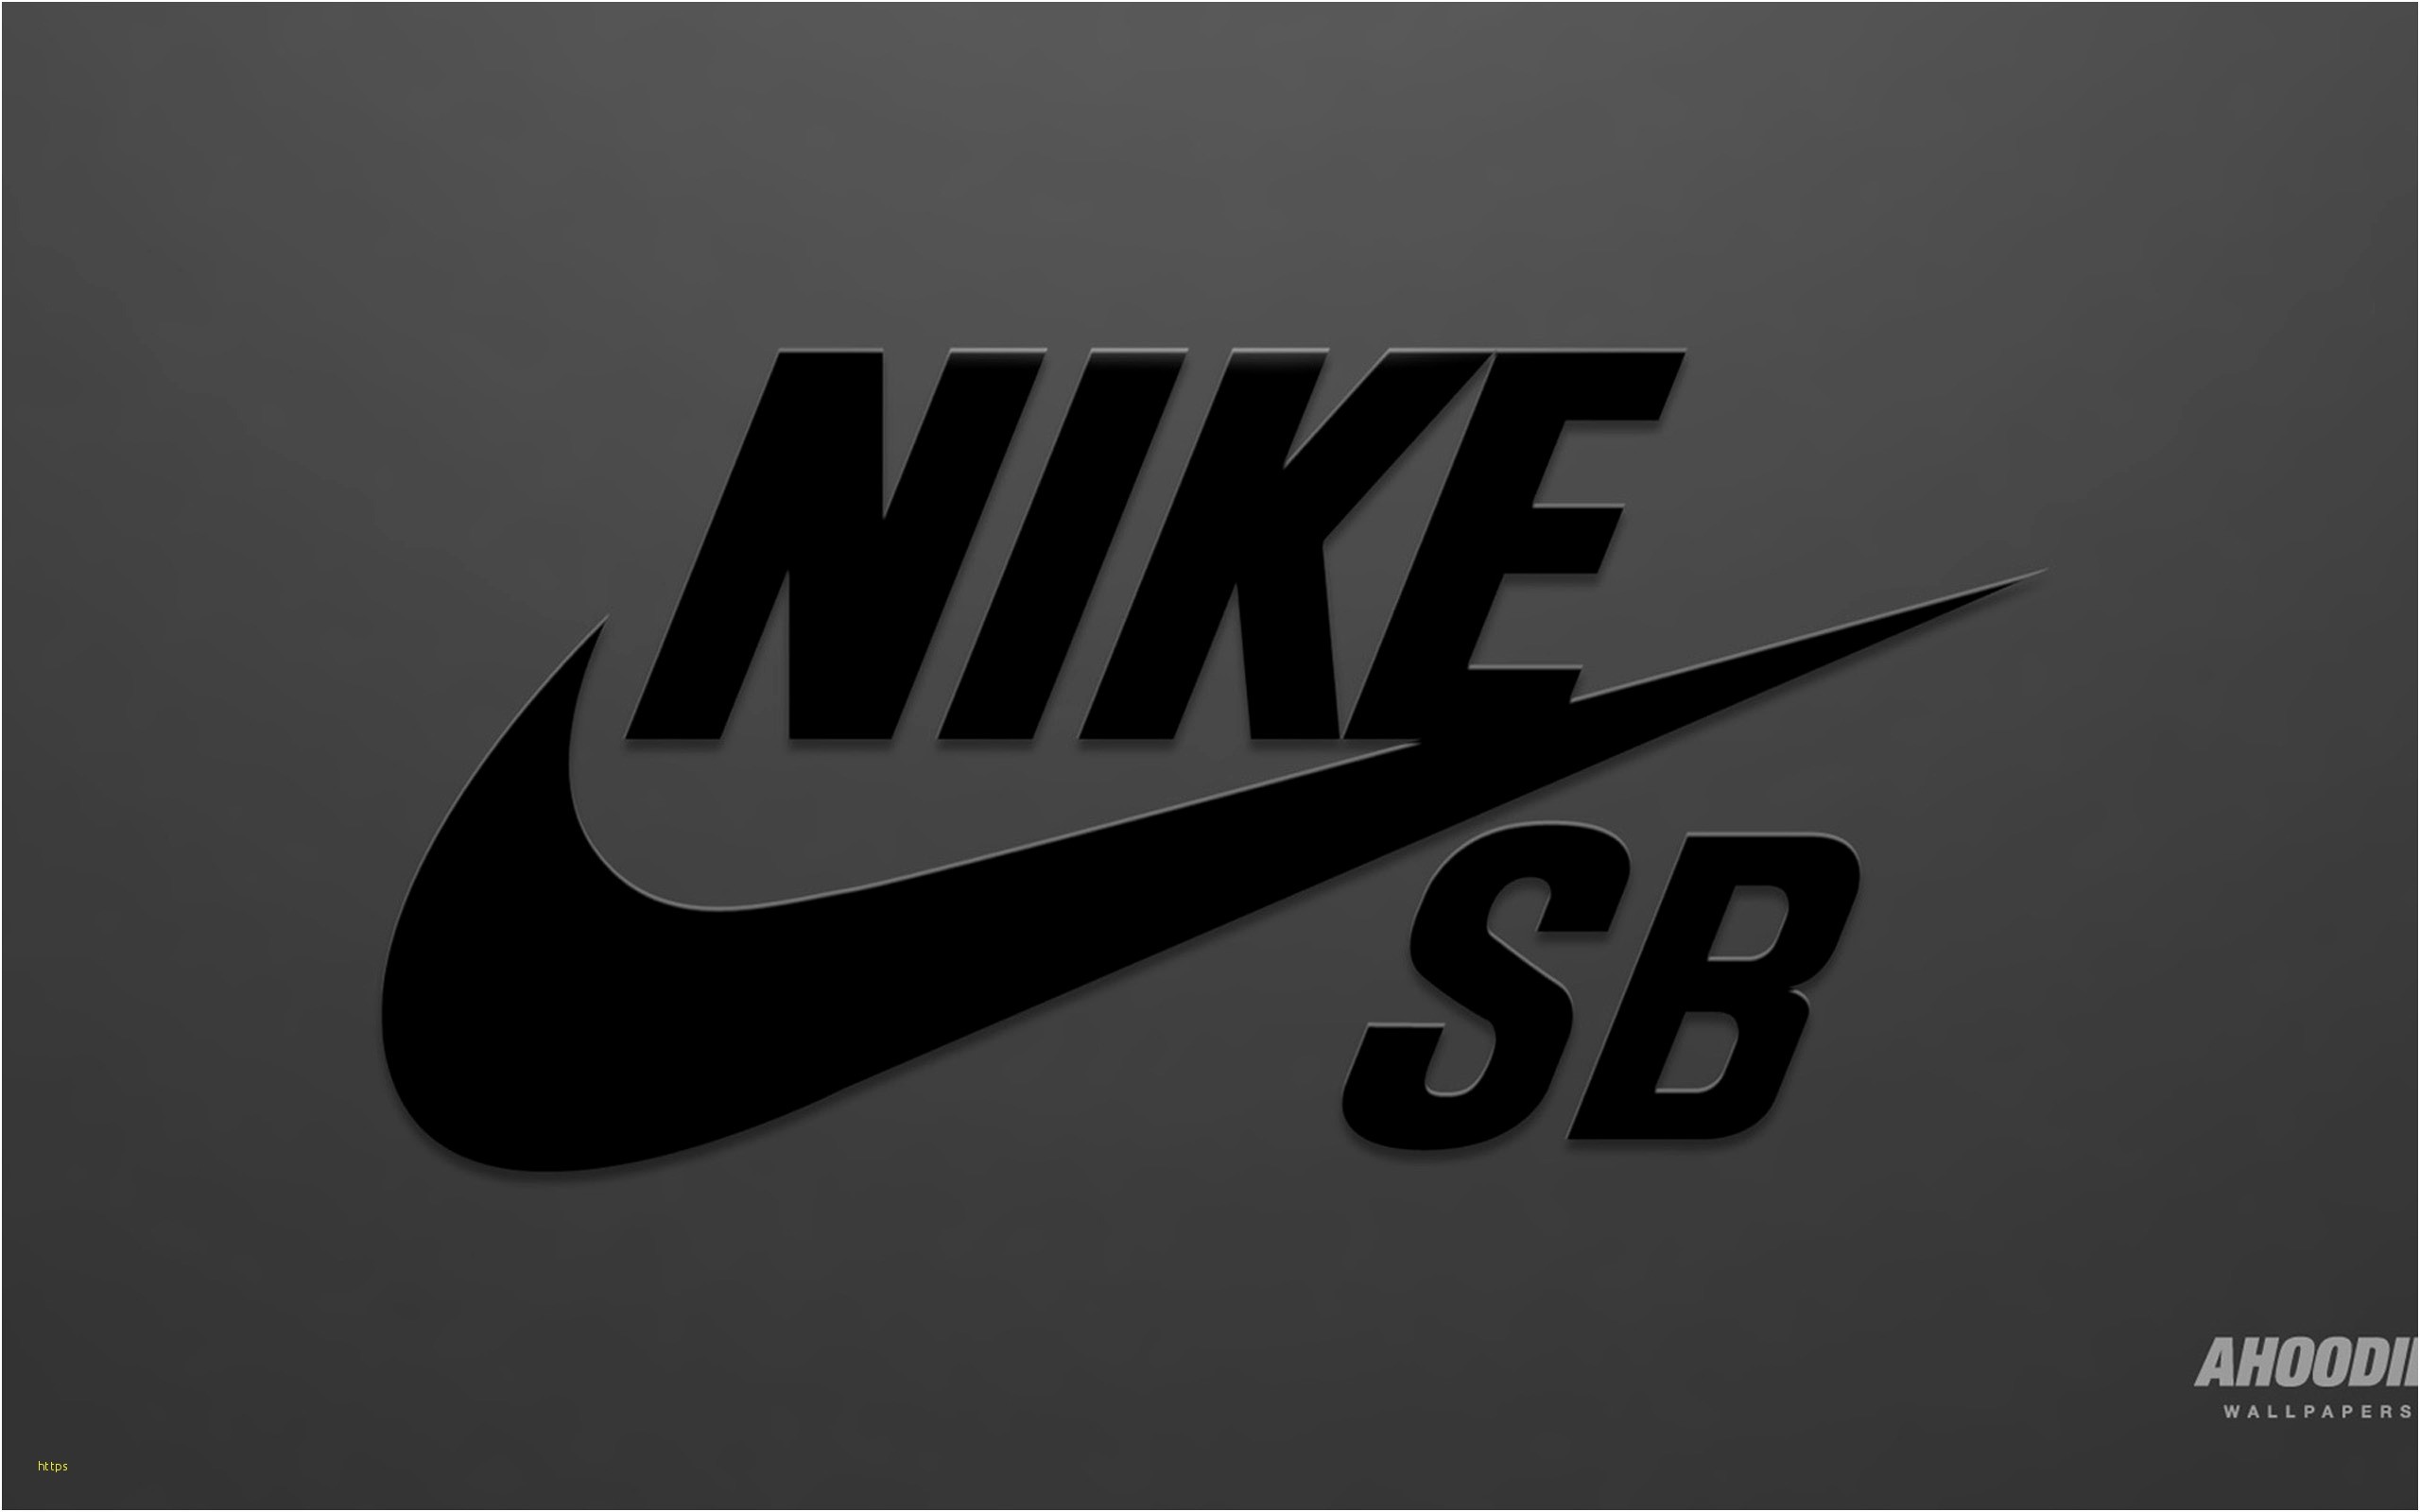 2560x1600, Nike Wallpaper For Iphone Awesome Nike Sb - Nike Wallpaper Sb - HD Wallpaper 